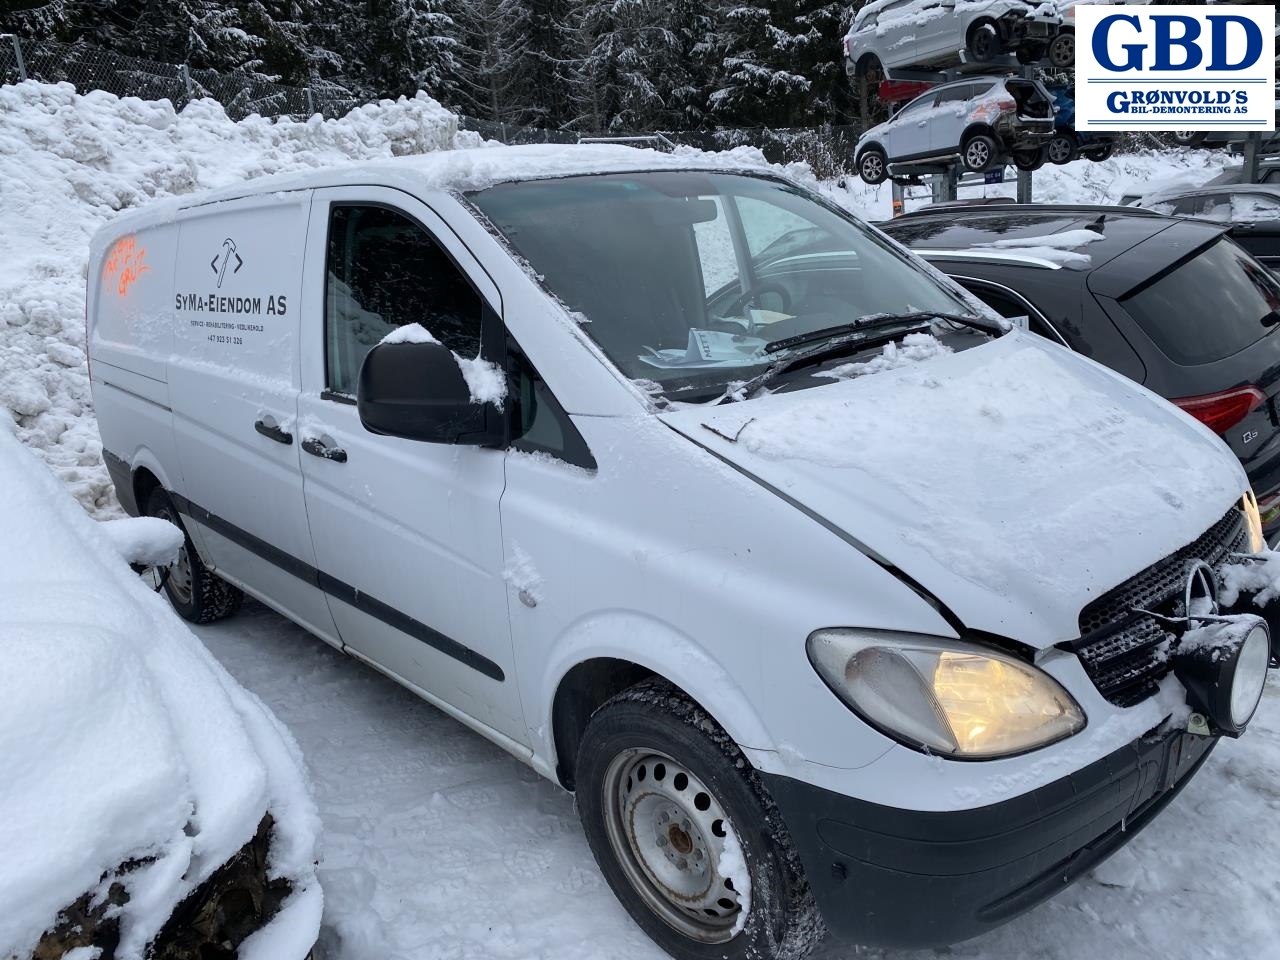 Mercedes Vito/Viano, 2004-2010 (W639, Fase 1) parts car, Engine code: OM646.980, Gearbox code: 